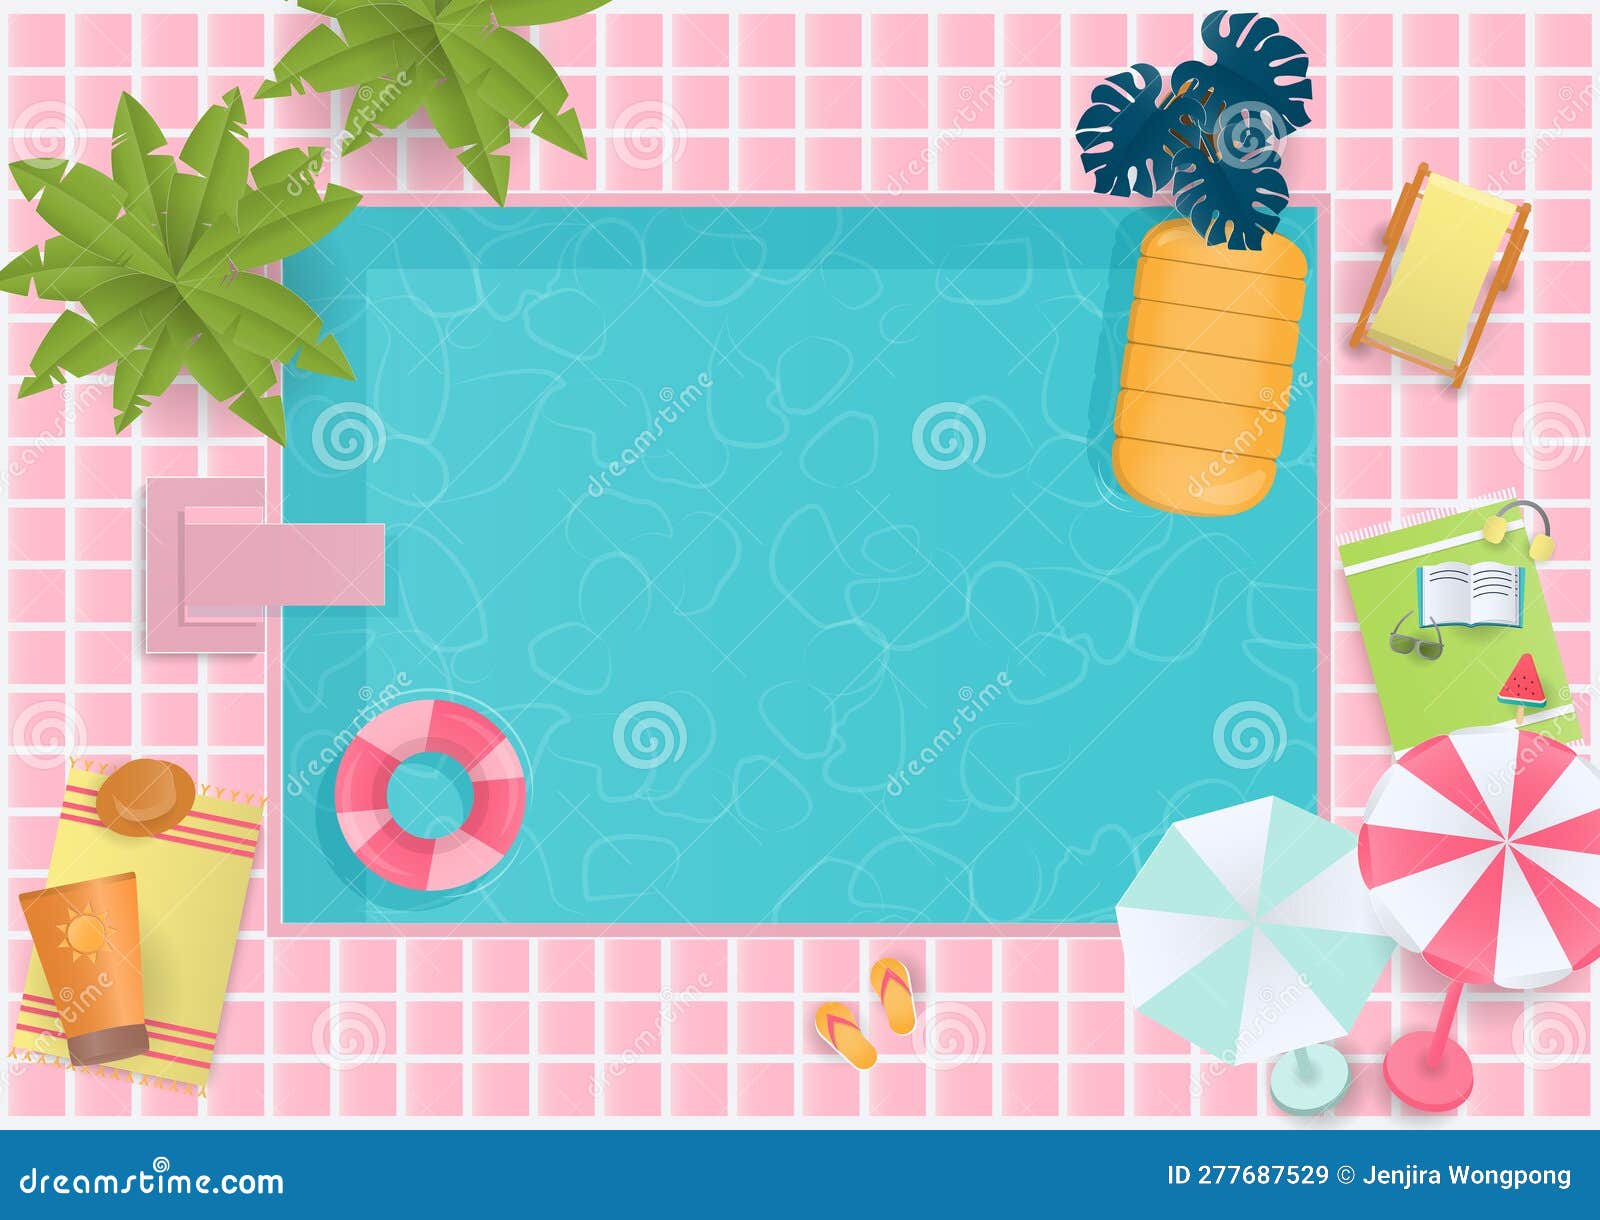 Watercolor Summer Set Swimming Pool Elements Stock Illustration by ©gulmana  #201535200